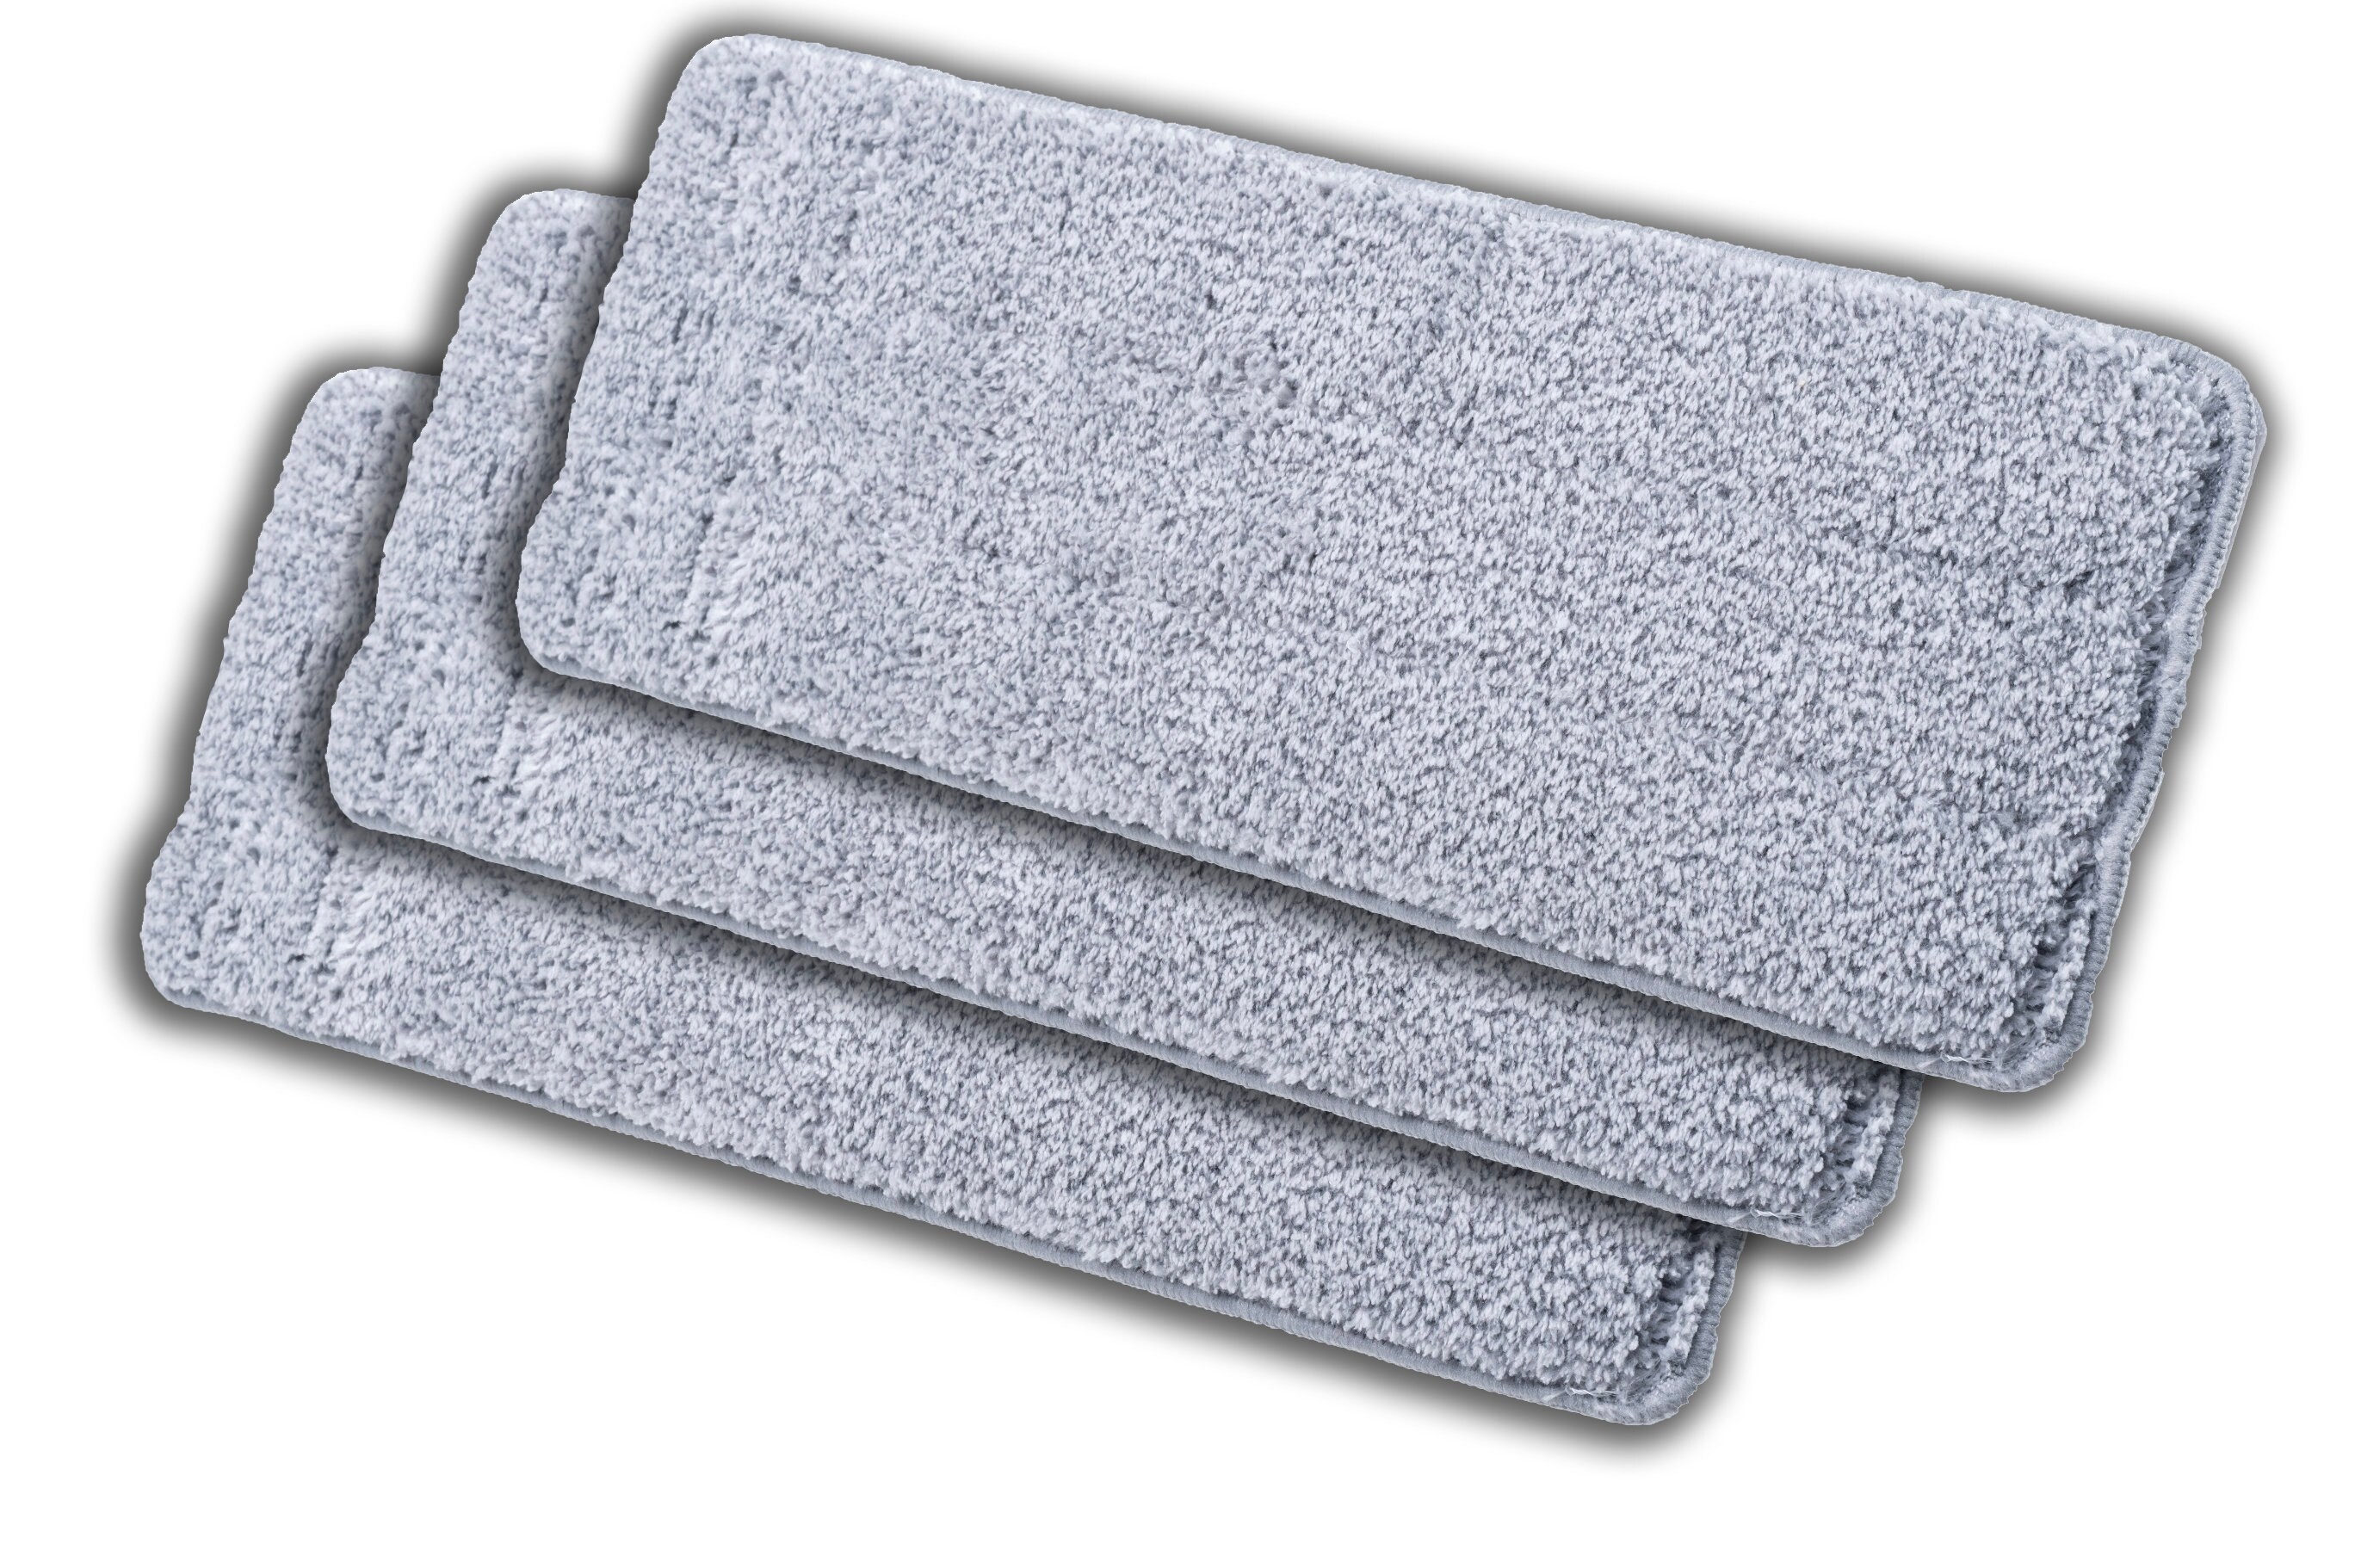 Cleanzoom, Flat Mop, Replacement Pad, Microfiber, Washable Pad, 3